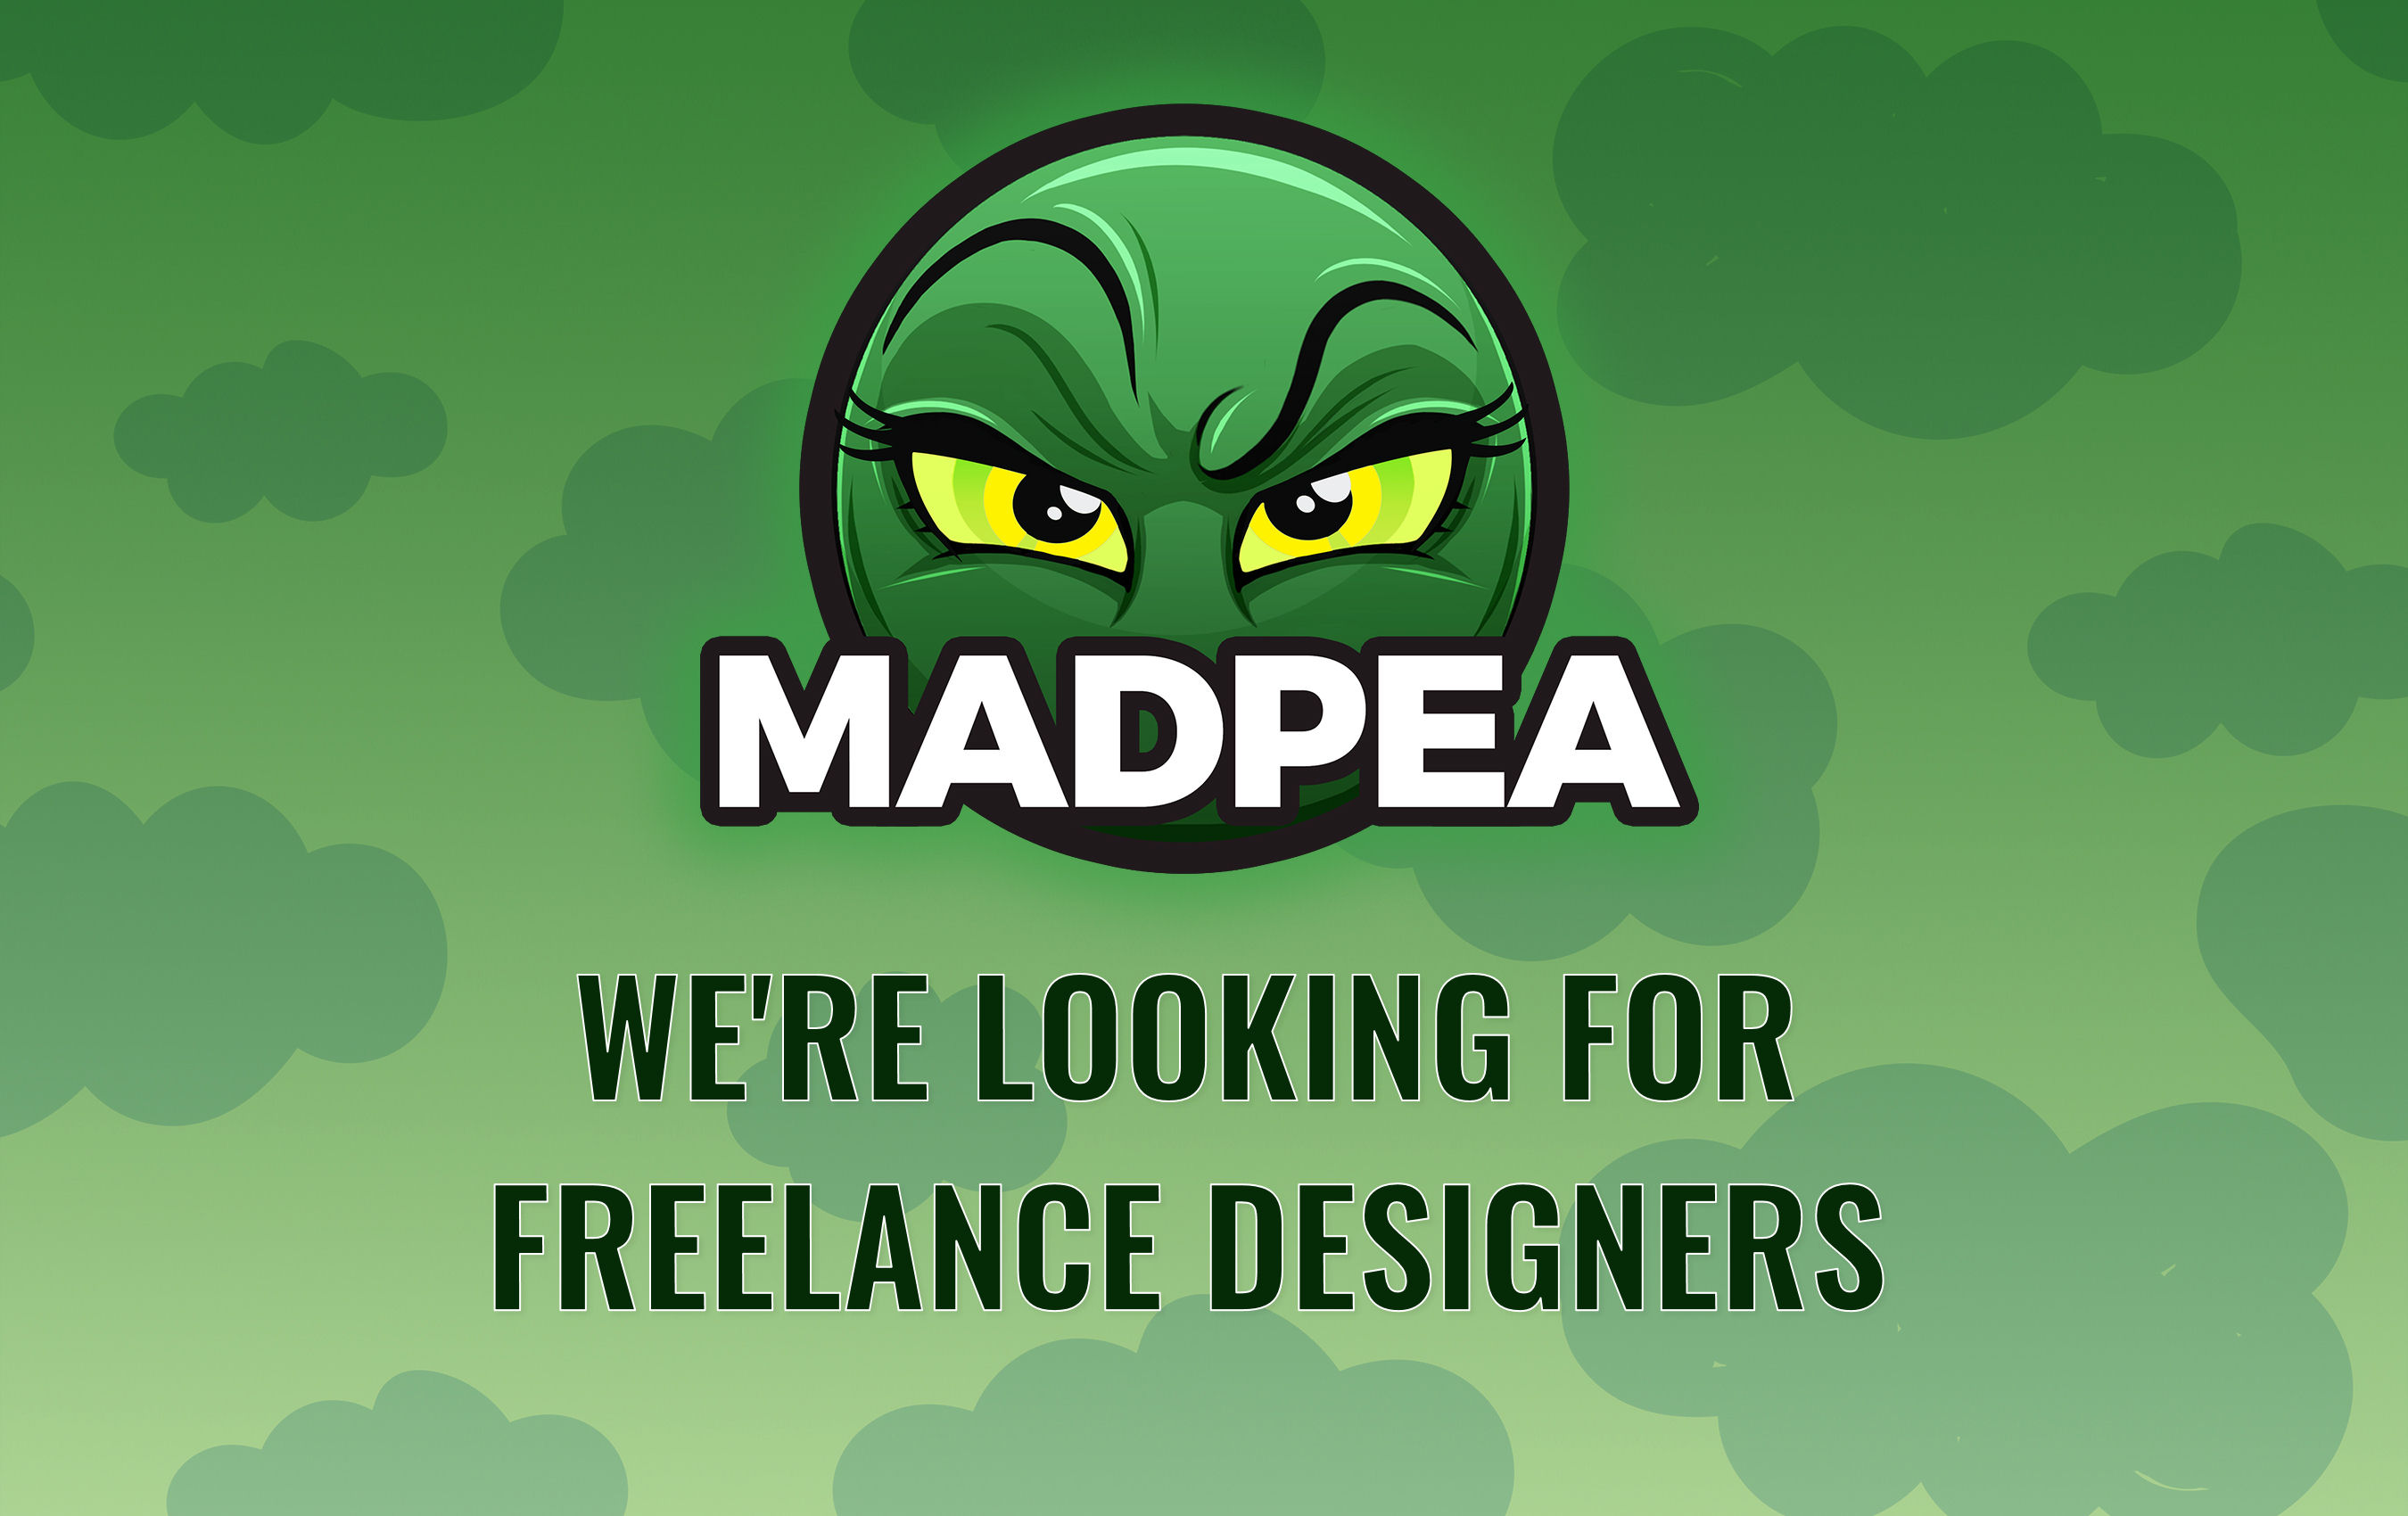 MadPea Is Searching For Talented Designers